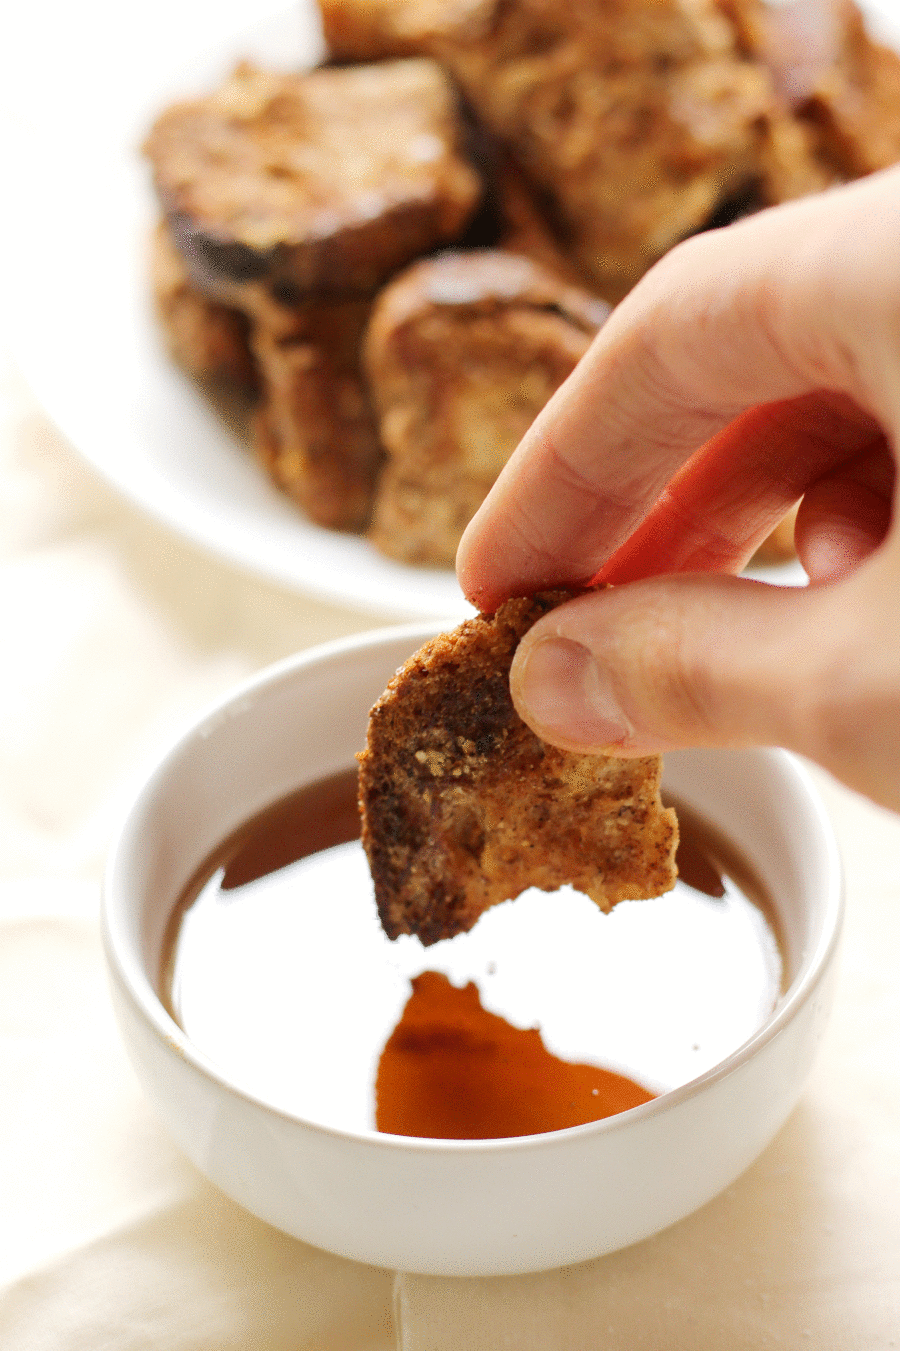 Gluten-Free Cinnamon French Toast Bites (Allergy-Free, Vegan) | Strength and Sunshine @RebeccaGF666 Breakfast just got even more fun! Gluten-Free Cinnamon French Toast Bites that are allergy-free, vegan, and perfect for little hands! An easy recipe perfect for a healthy weekend treat! Kid-loved and mom-approved!